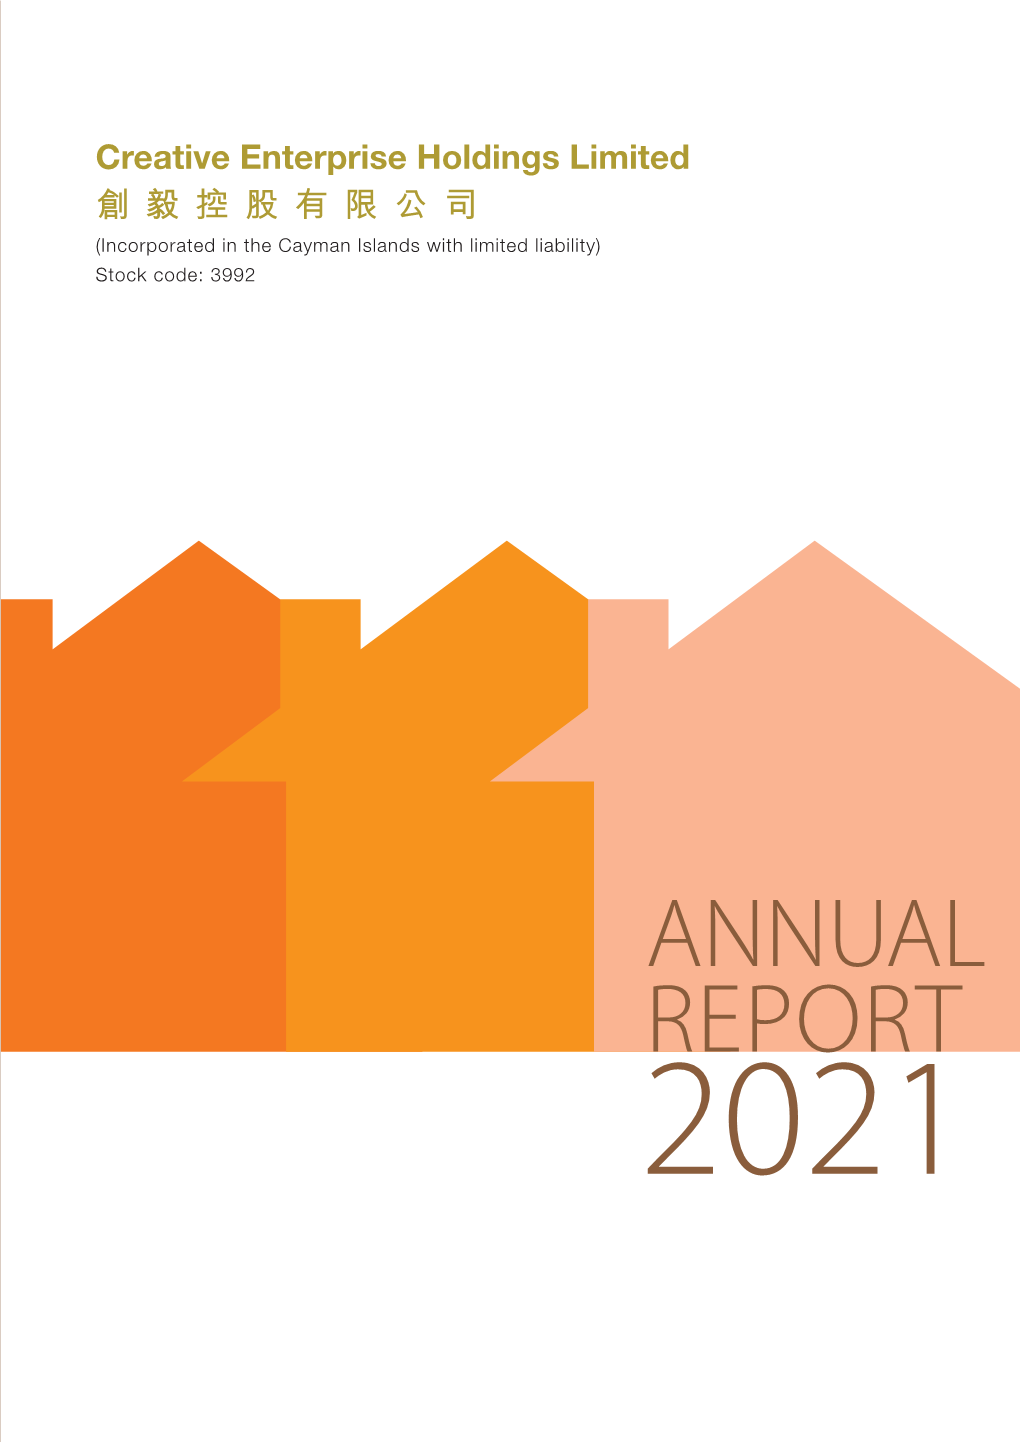 Annual Report 2021 CORPORATE INFORMATION